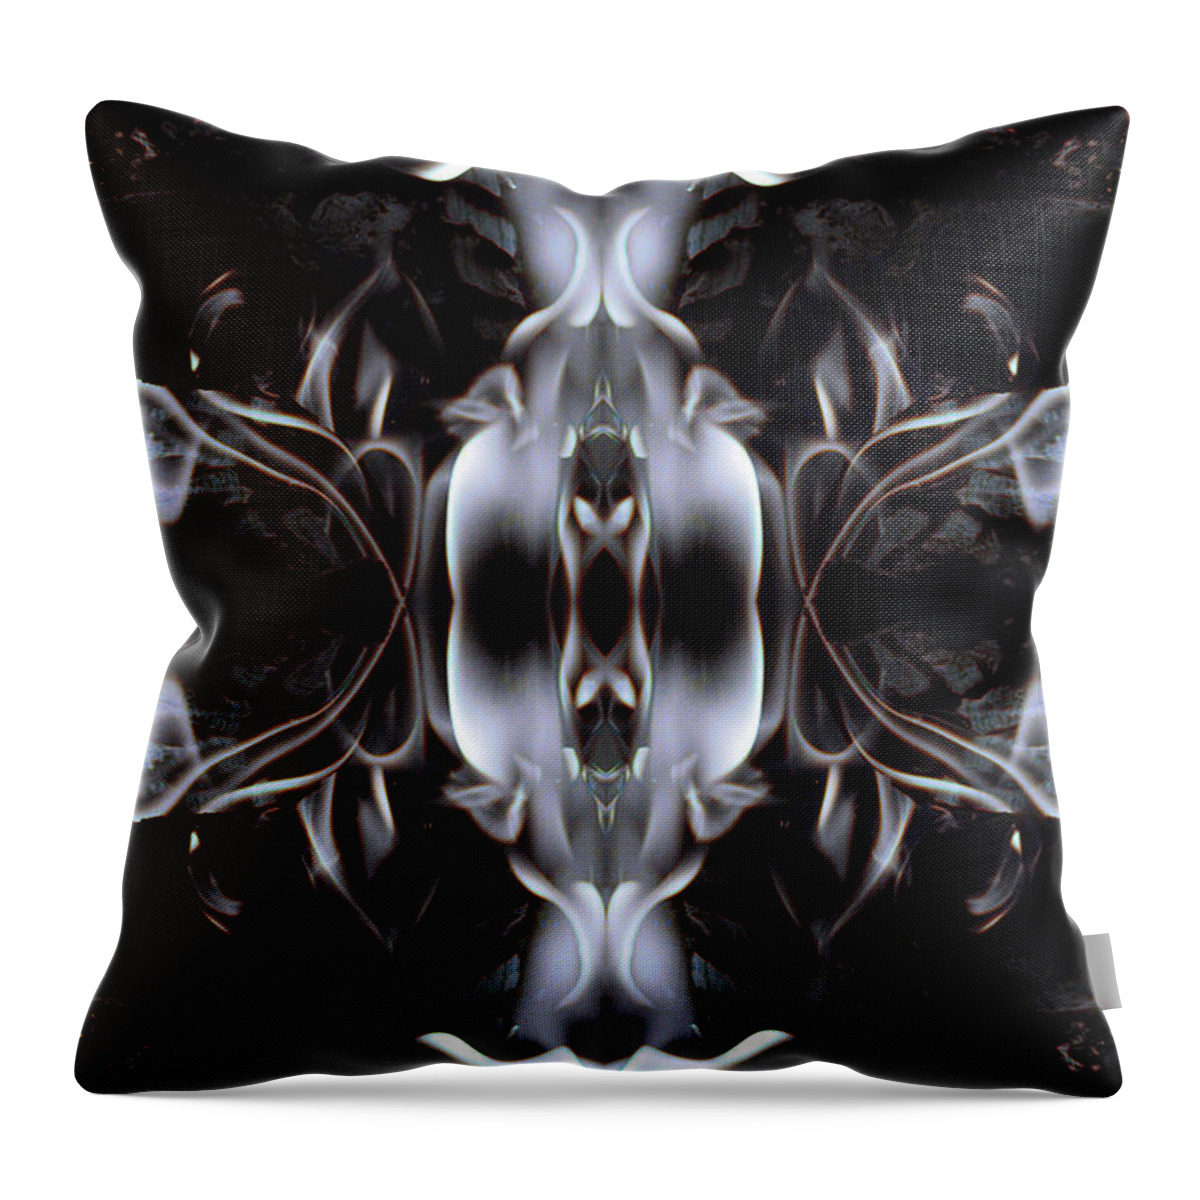 Image Tags Throw Pillow featuring the digital art Fierce Flake 2800 by Alex W McDonell